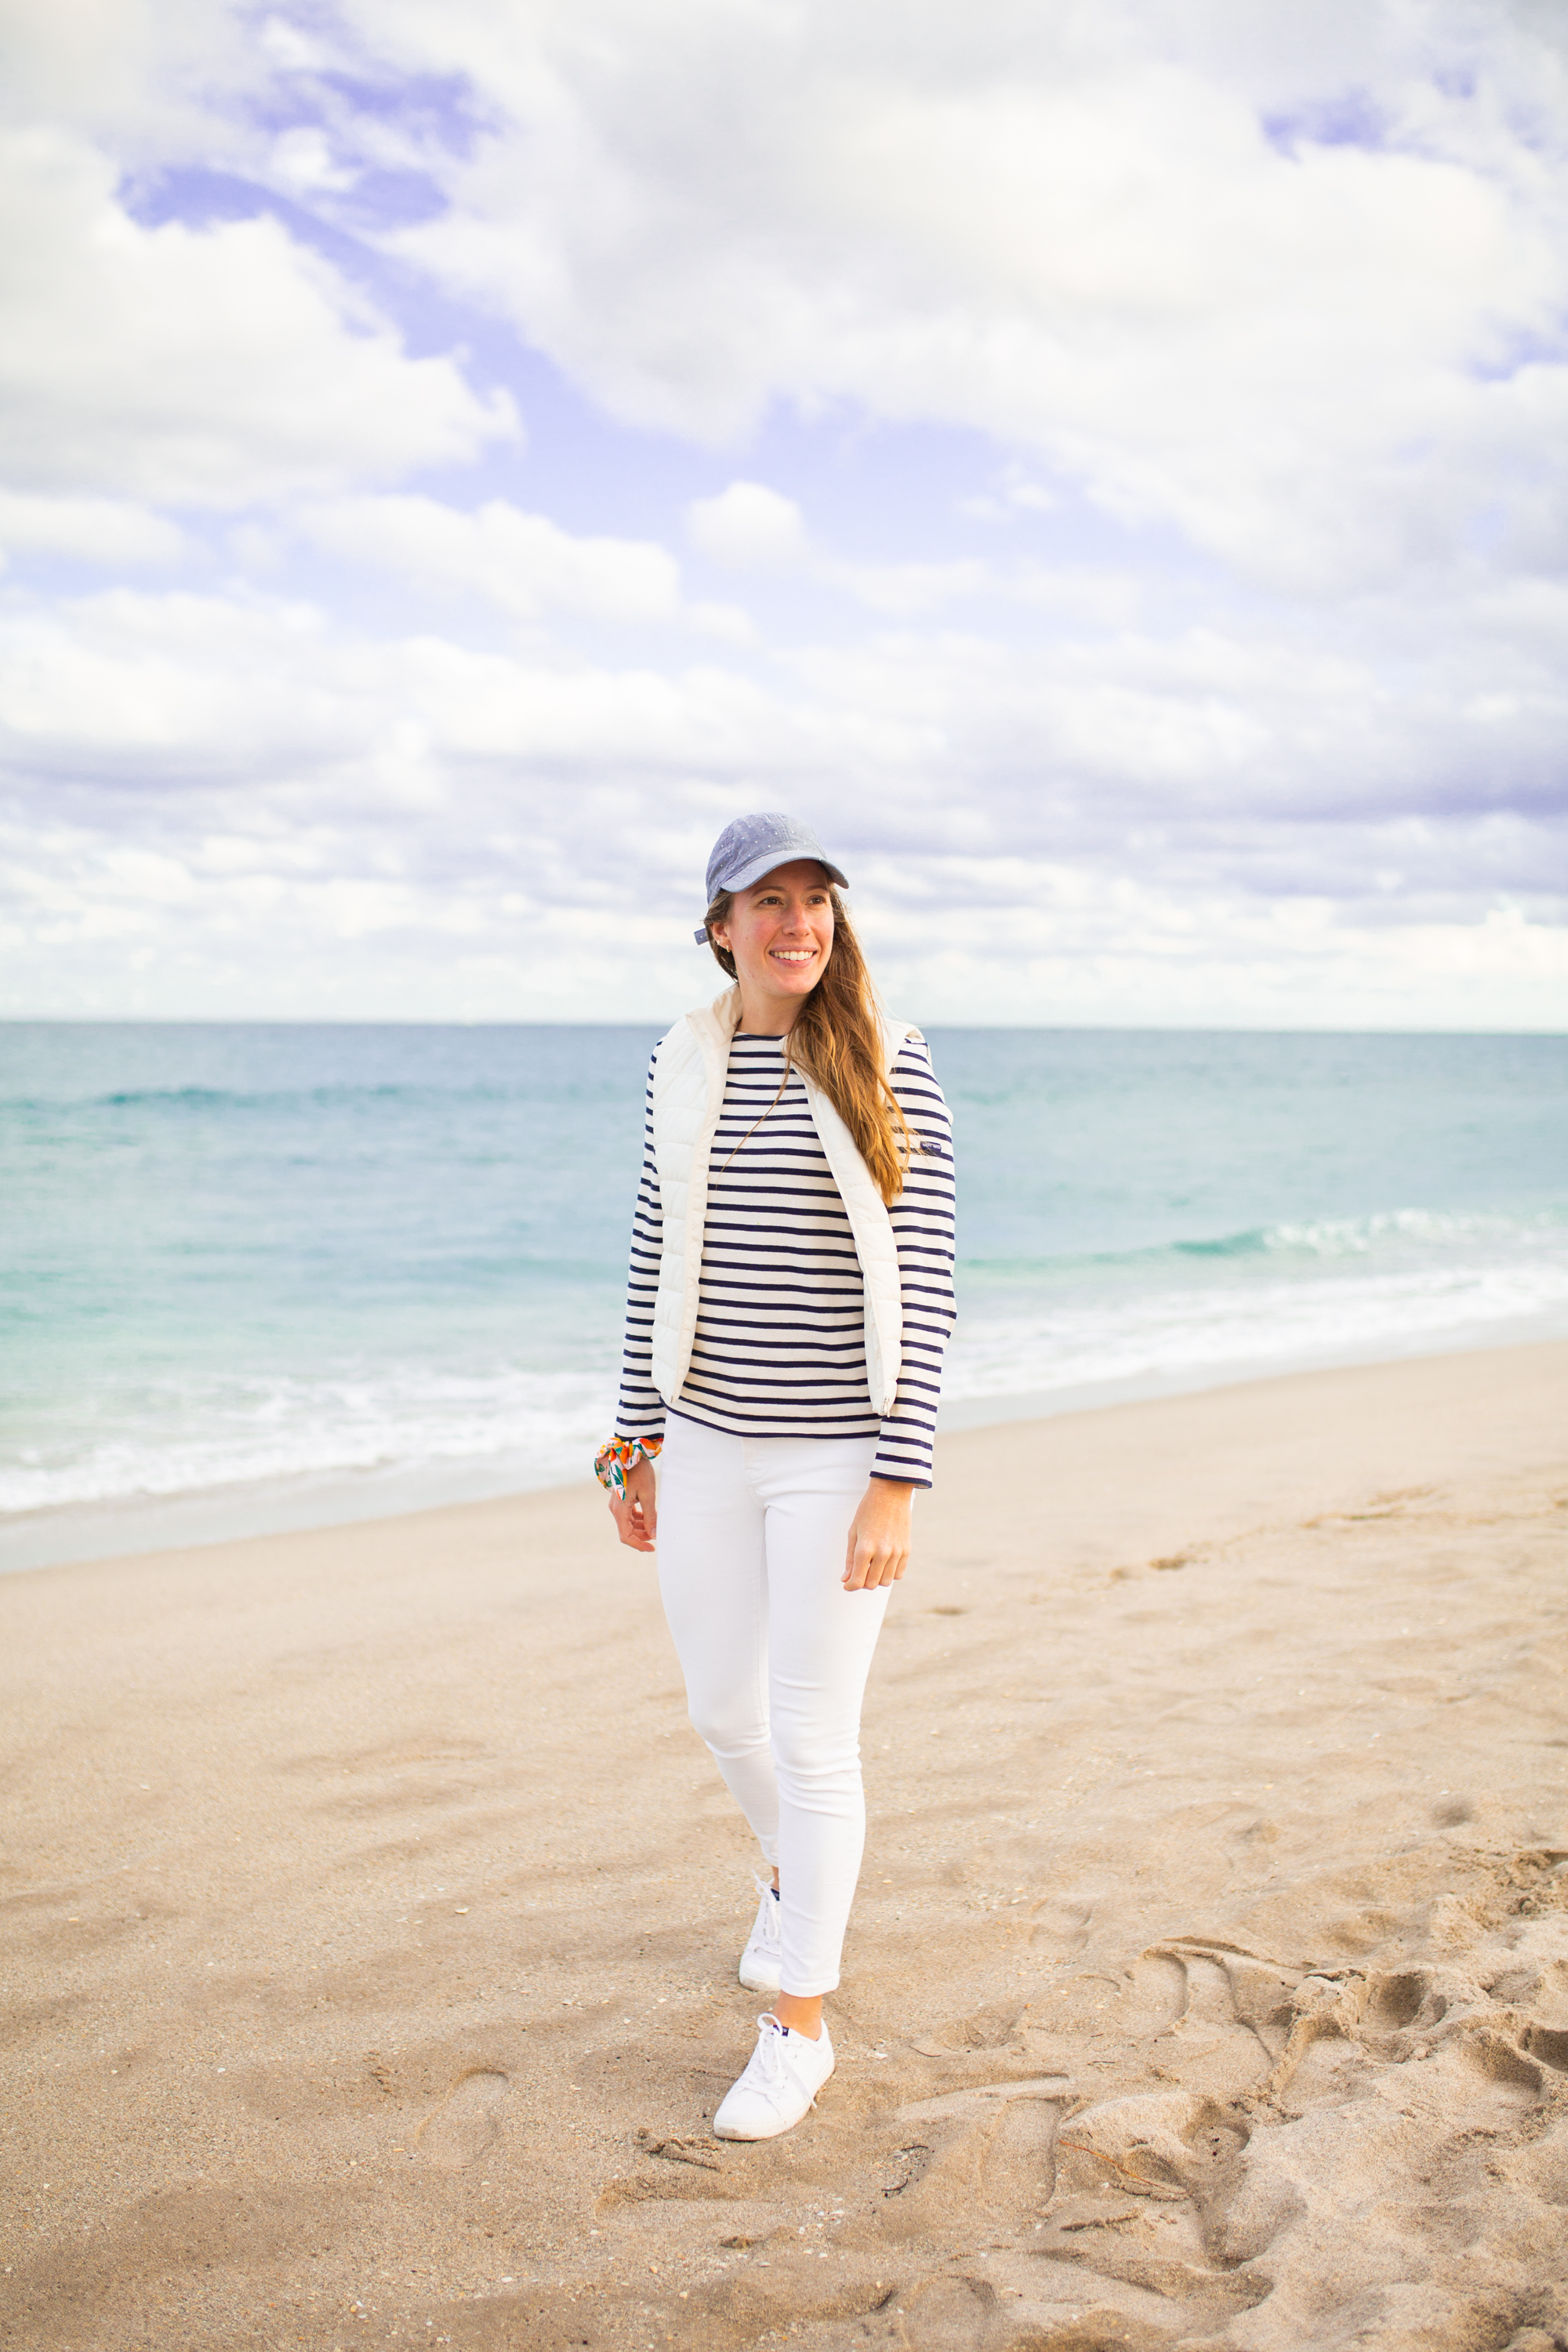 Saint James Breton Striped Shirt / American Style / Classic Style / Casual Outfit / How to Wear a Striped Top / White Jeans / Beach Style / Beach Outfit - Sunshine Style, A Florida Based Fashion Blog by Katie 